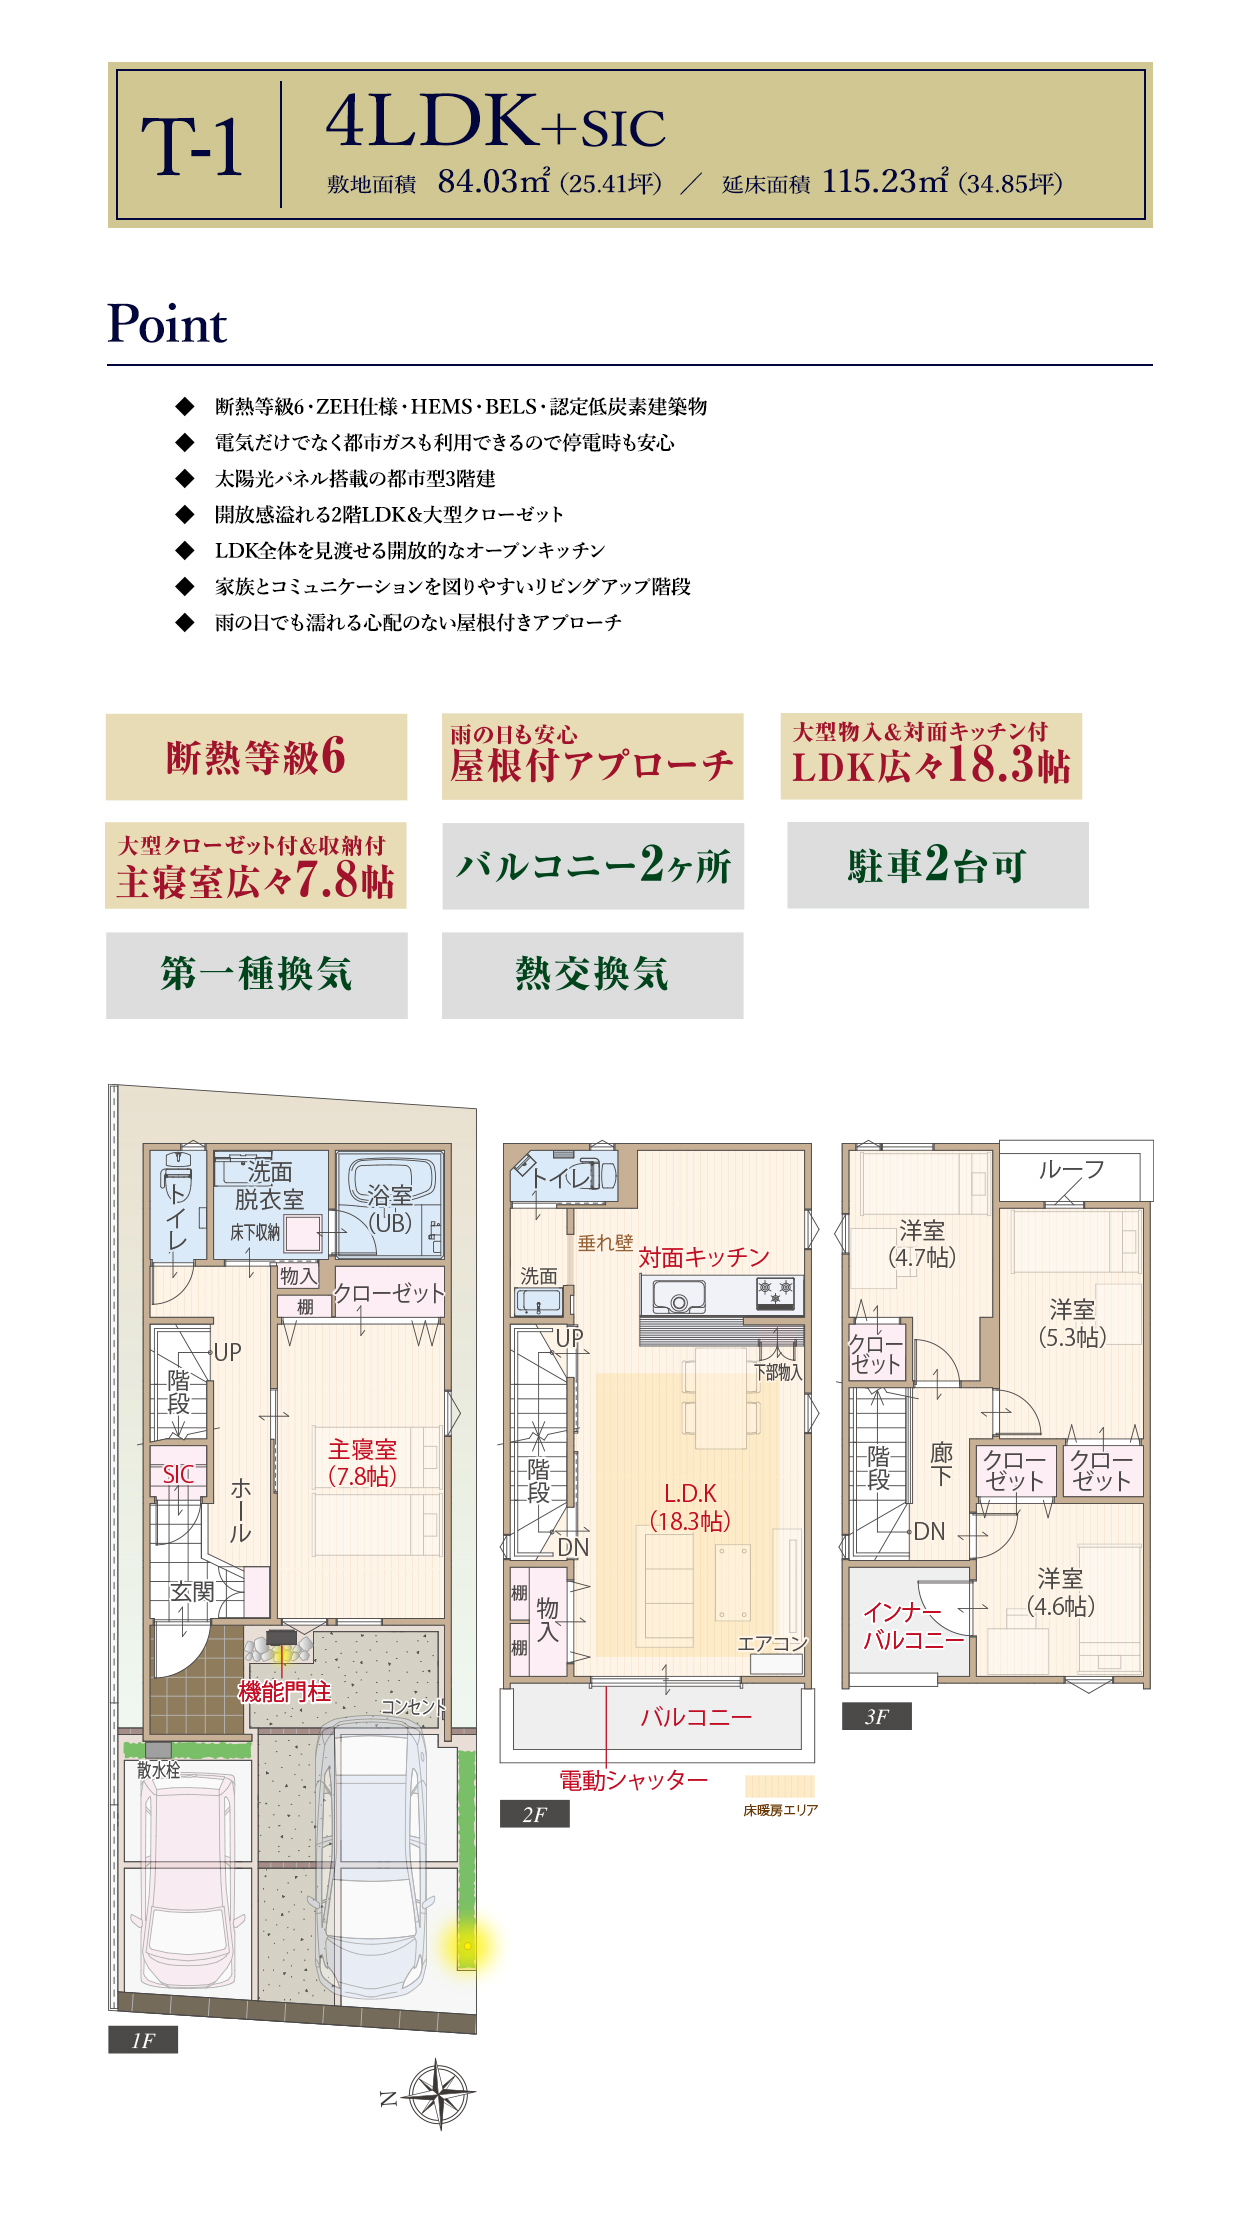 East Park Front　西区上小田井　T-1　間取り図